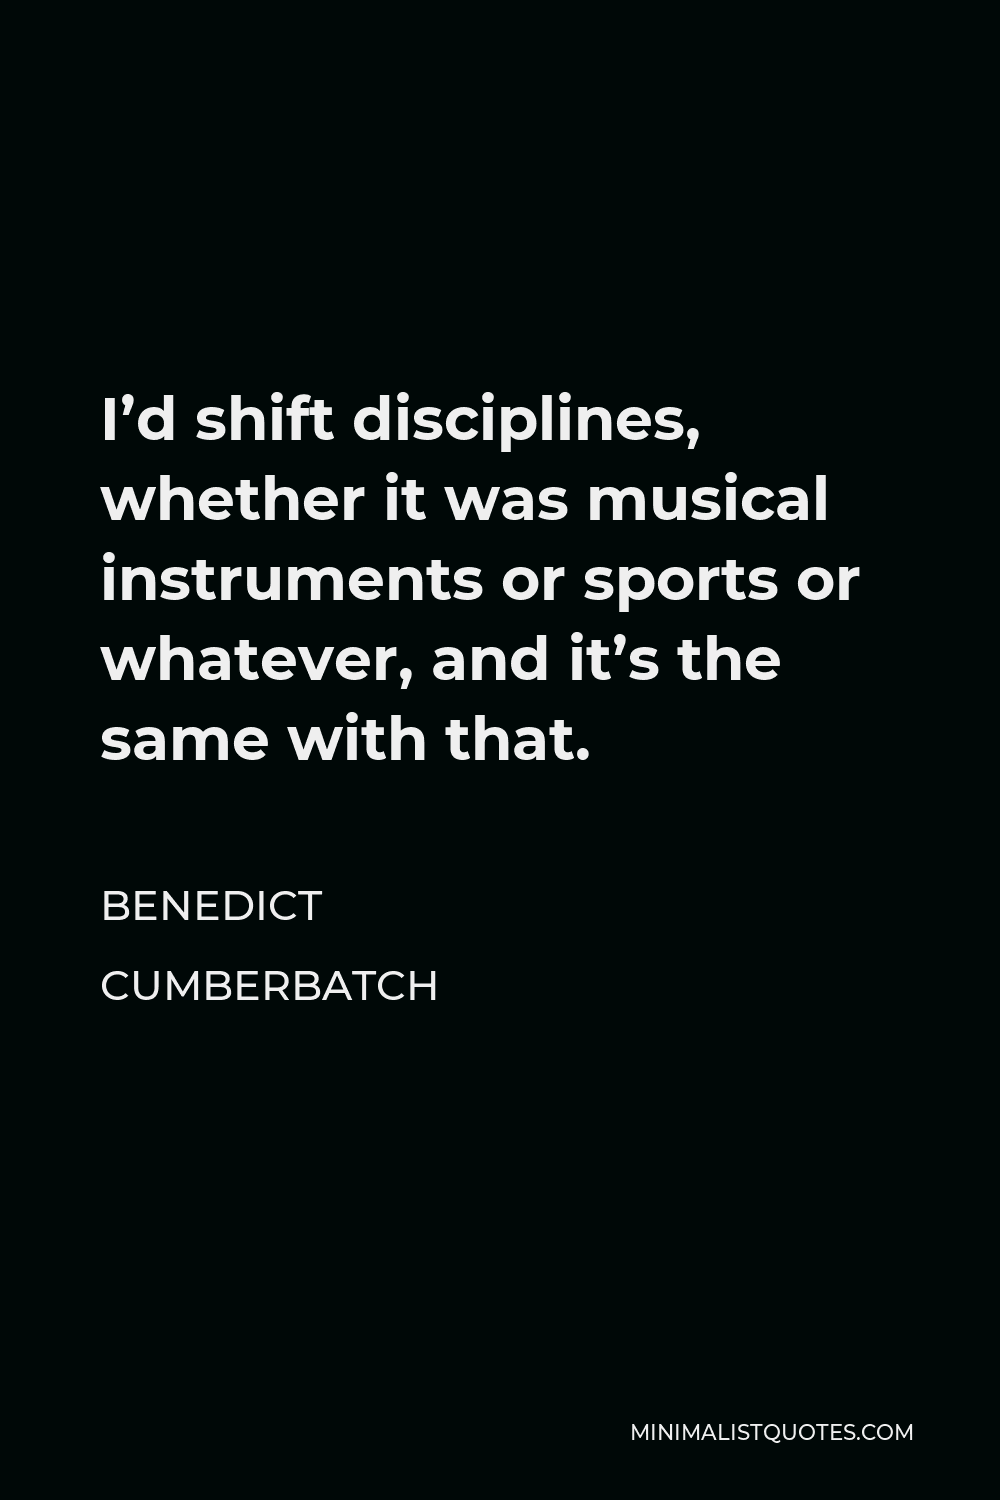 Benedict Cumberbatch Quote - I’d shift disciplines, whether it was musical instruments or sports or whatever, and it’s the same with that.